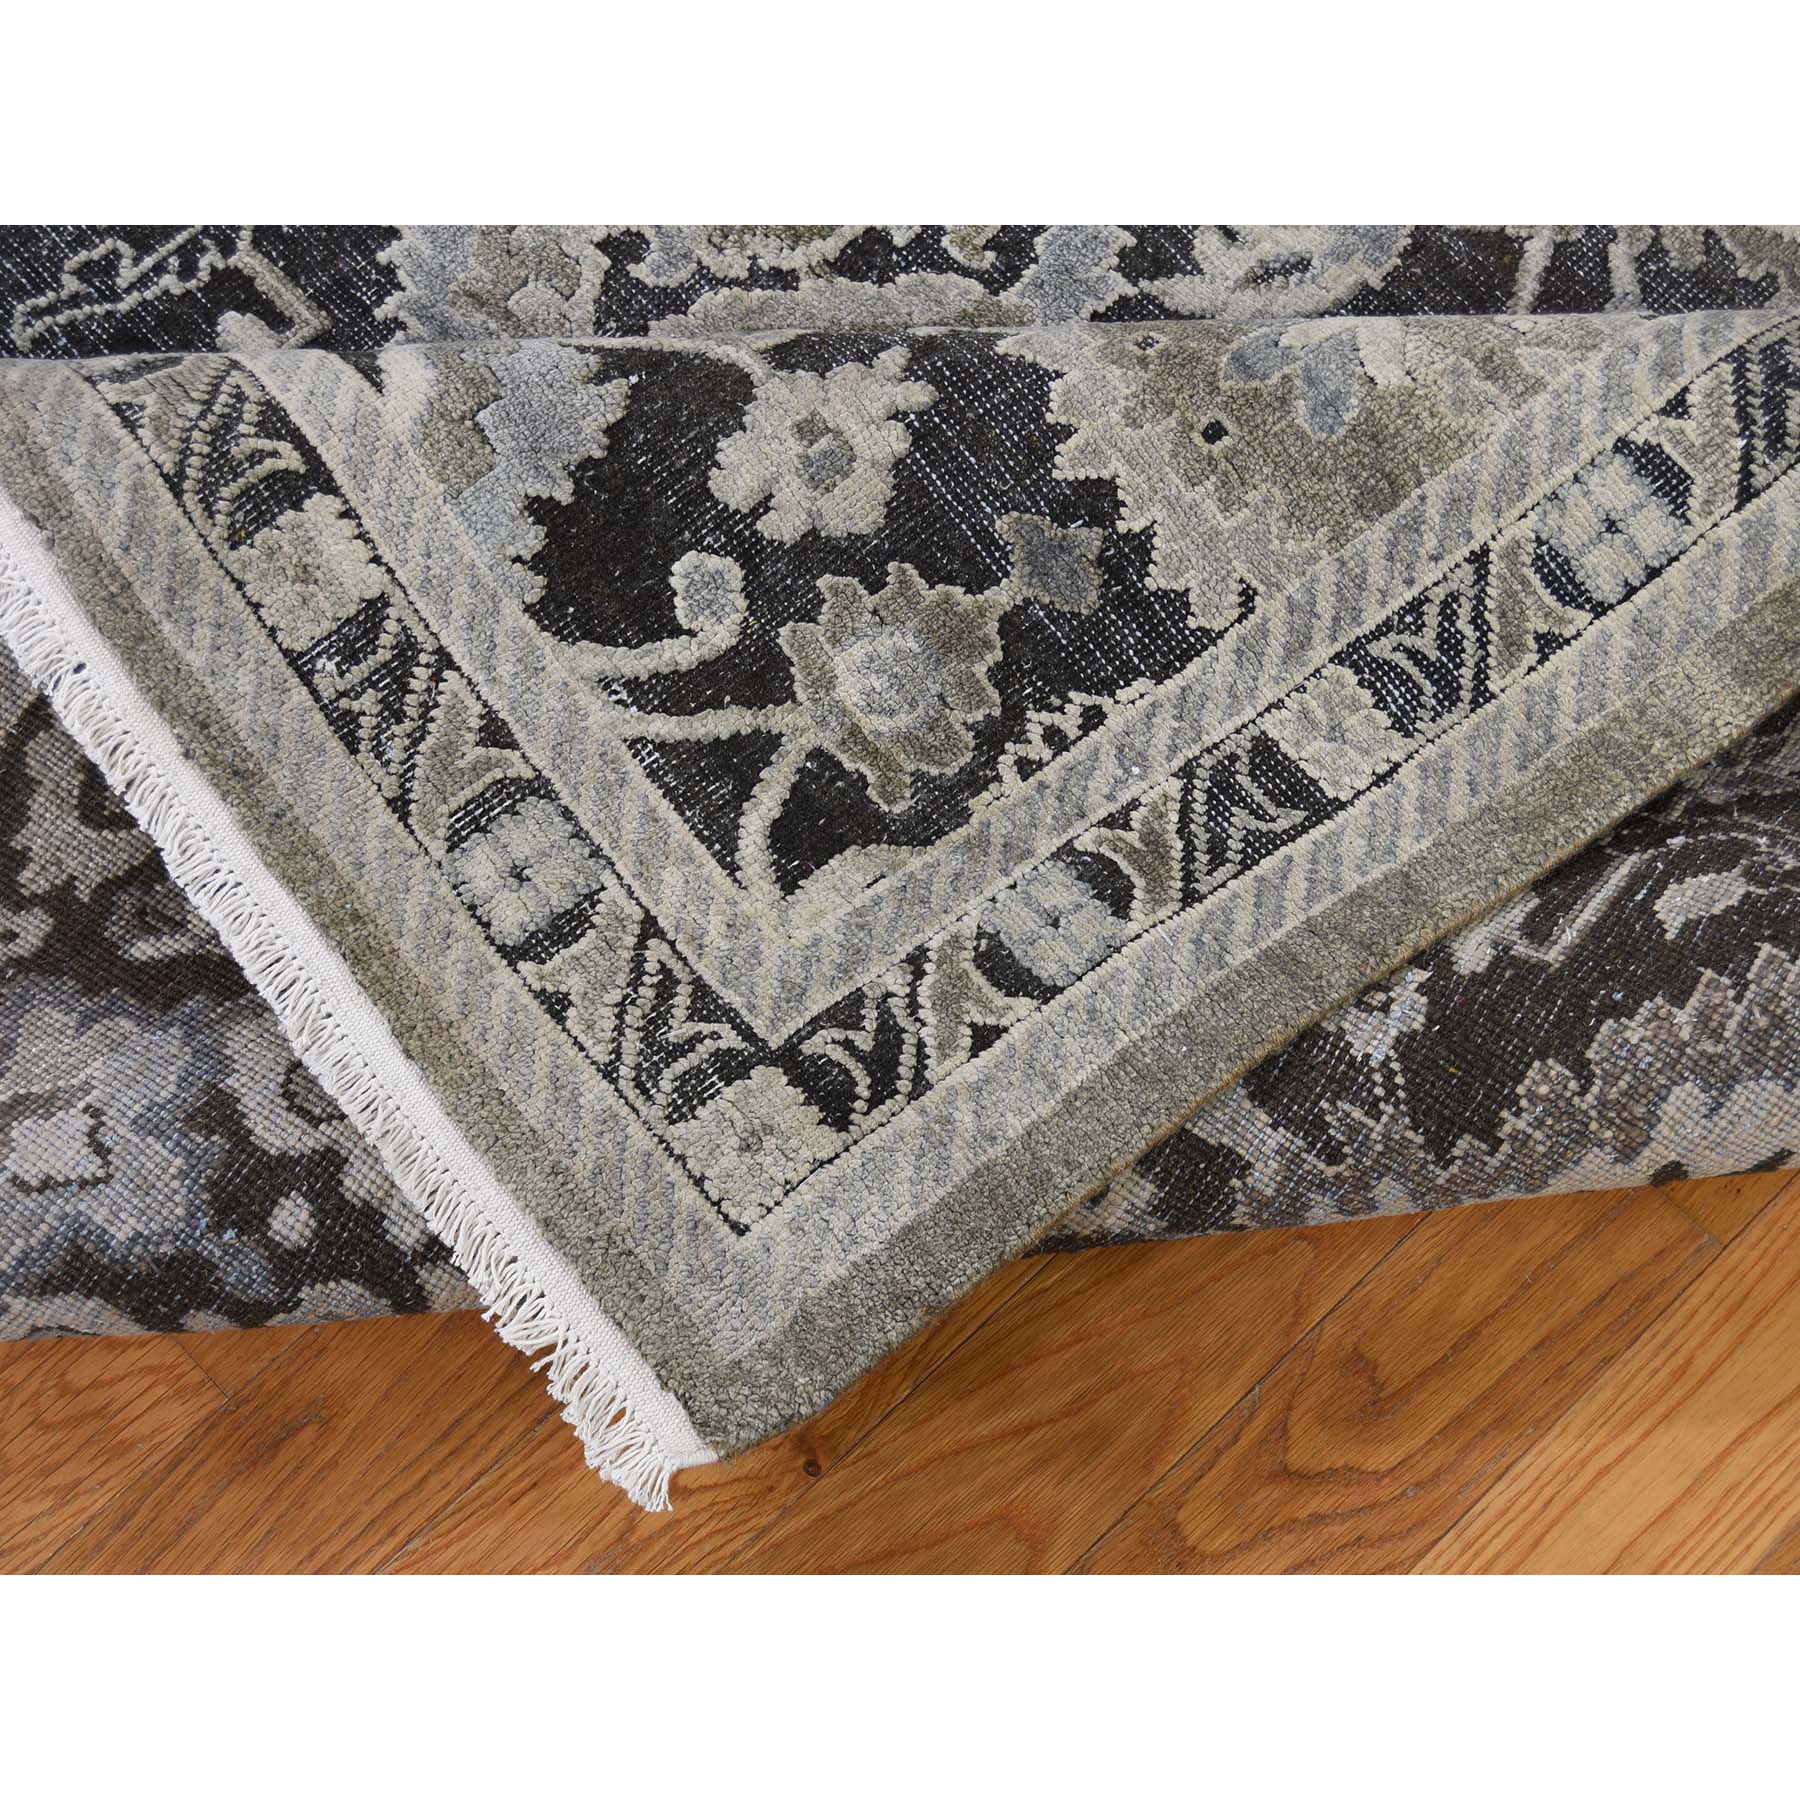 9-x12-1  Pure Silk With Textured Wool Oushak Influence Hand-Knotted Oriental Rug 